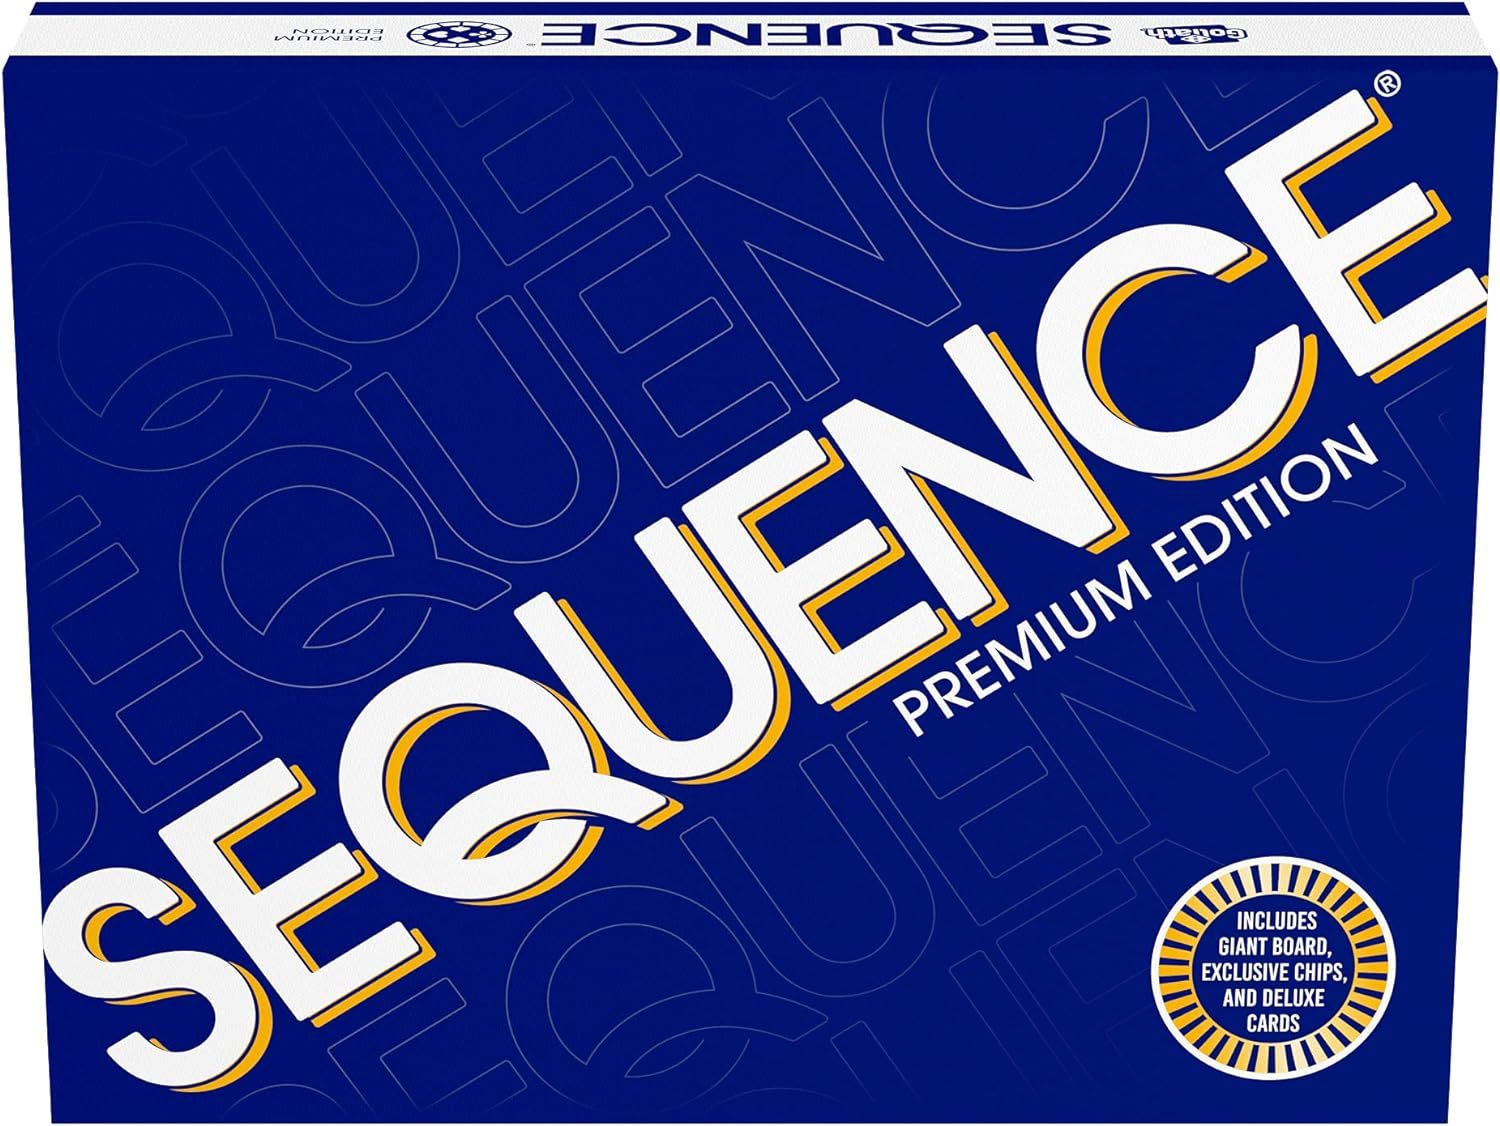 Primary image for Sequence Premium Edition Stunning Set with Giant Board 20.25 x 26.25 inches Excl